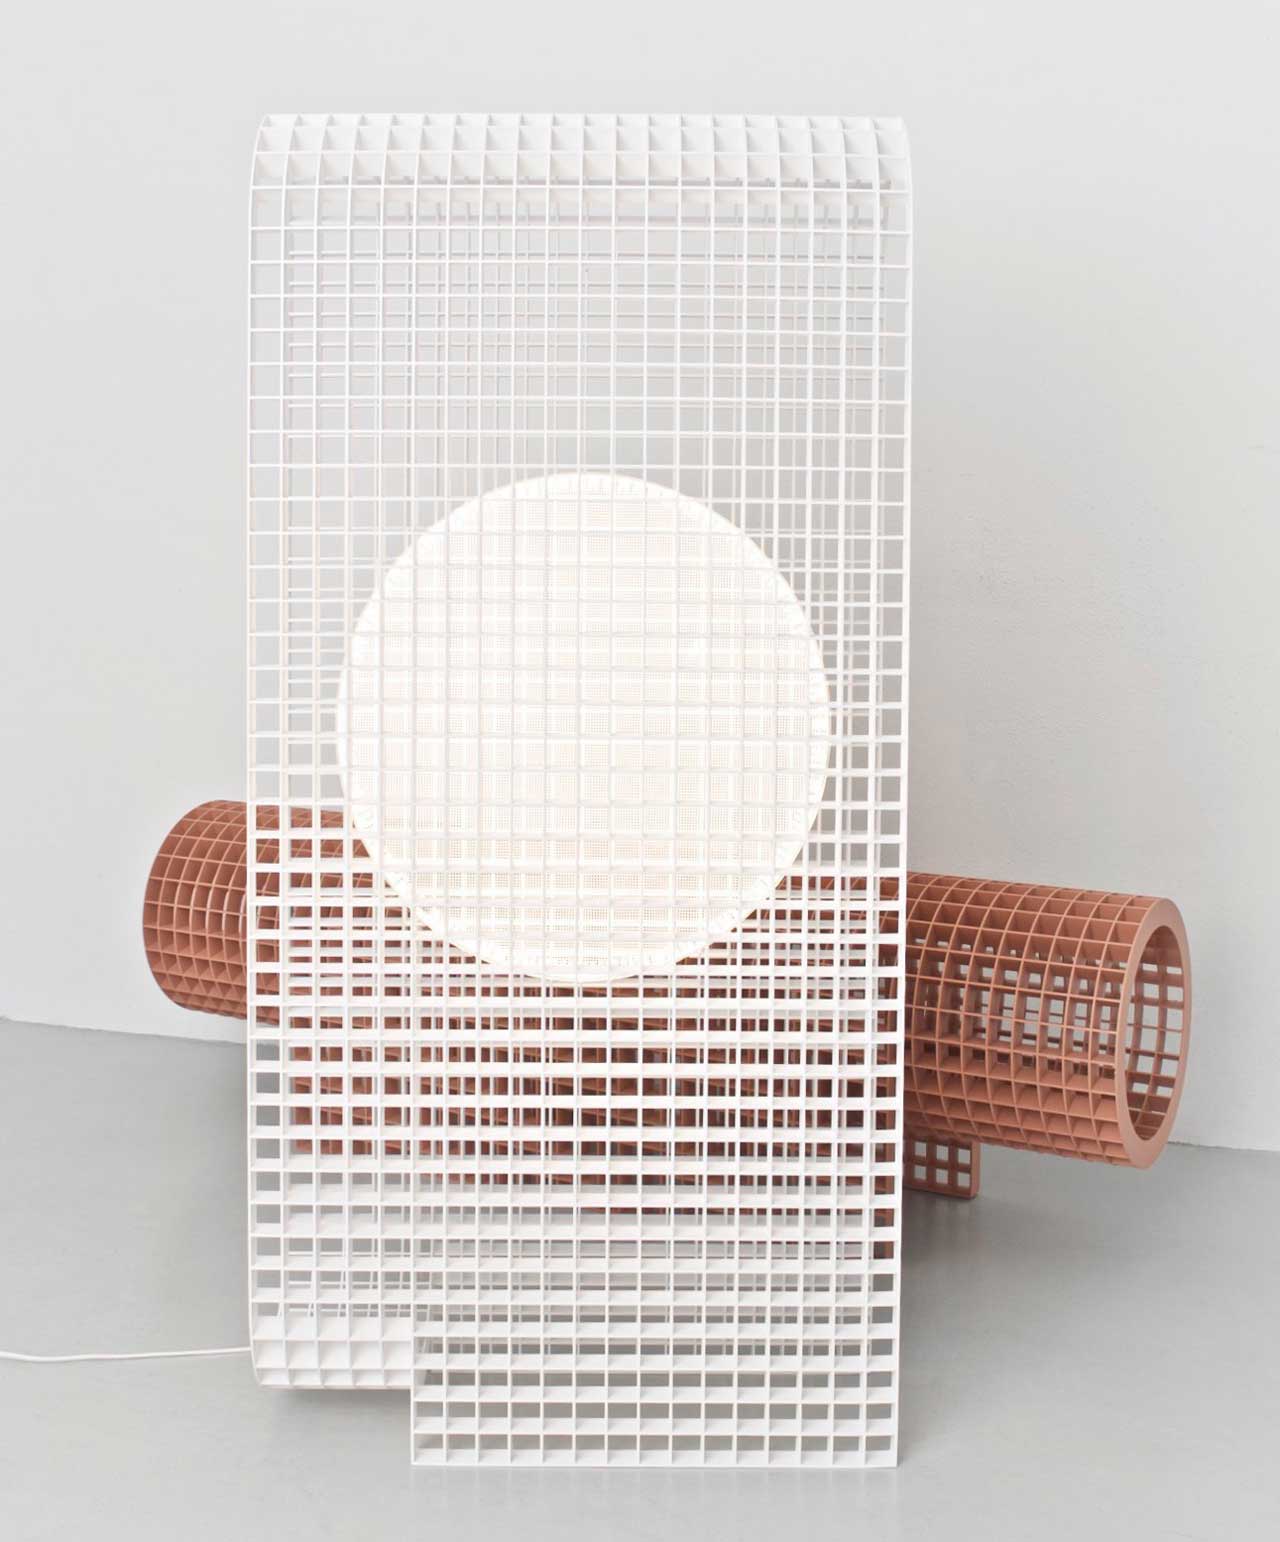 Matrix: A Light and Bench Built From a Grid Structure by OS & OOS